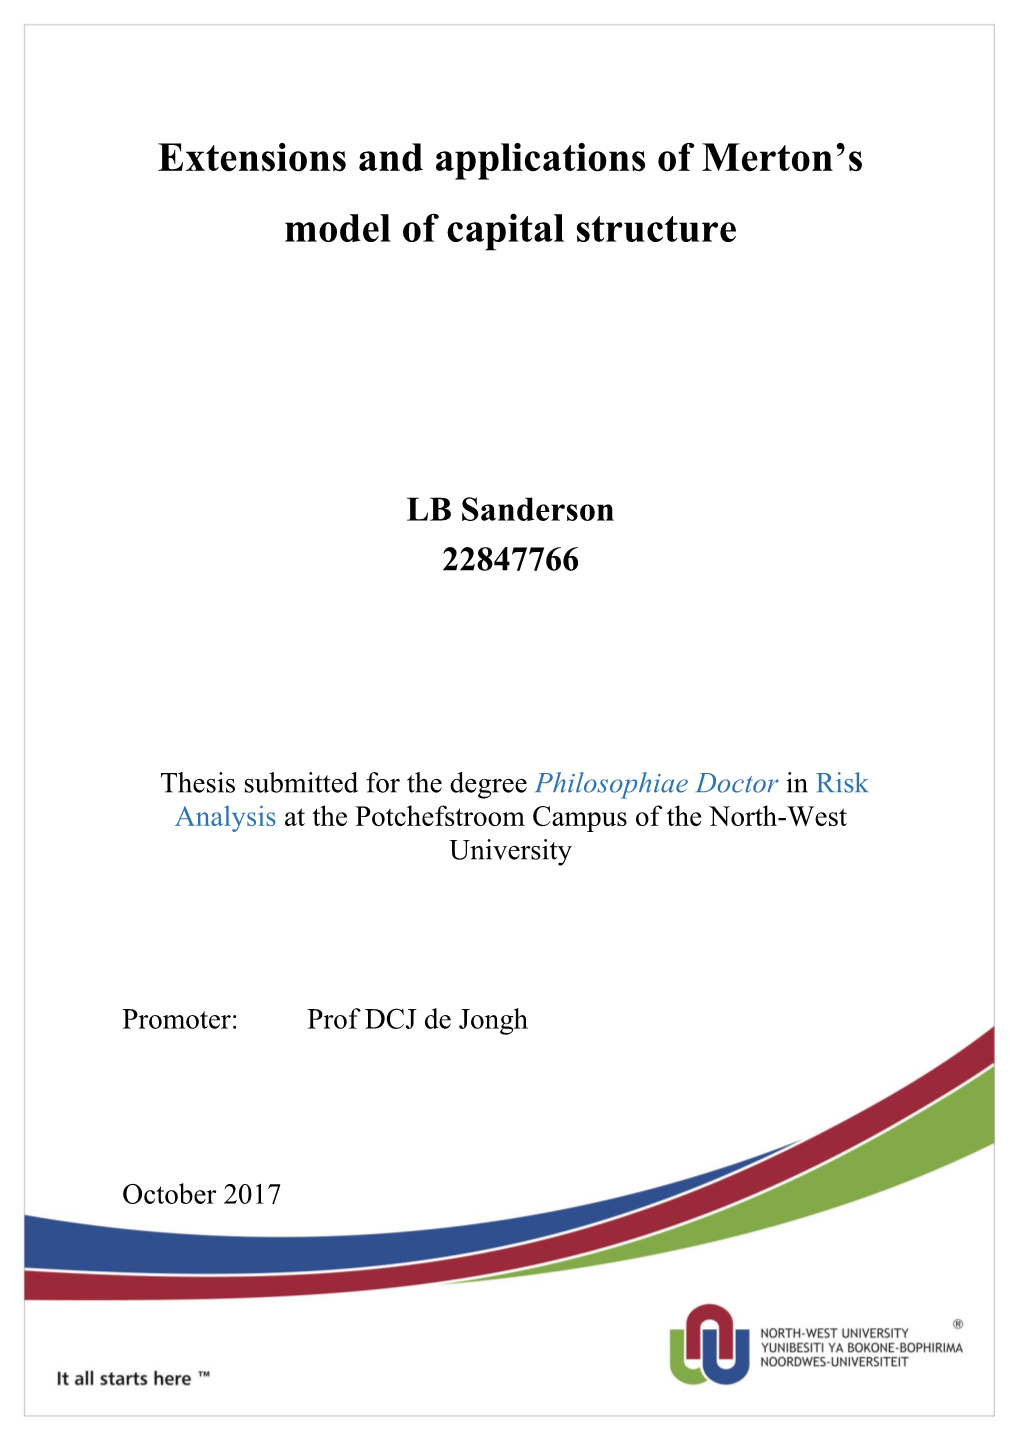 Extensions and Applications of Merton's Model of Capital Structure